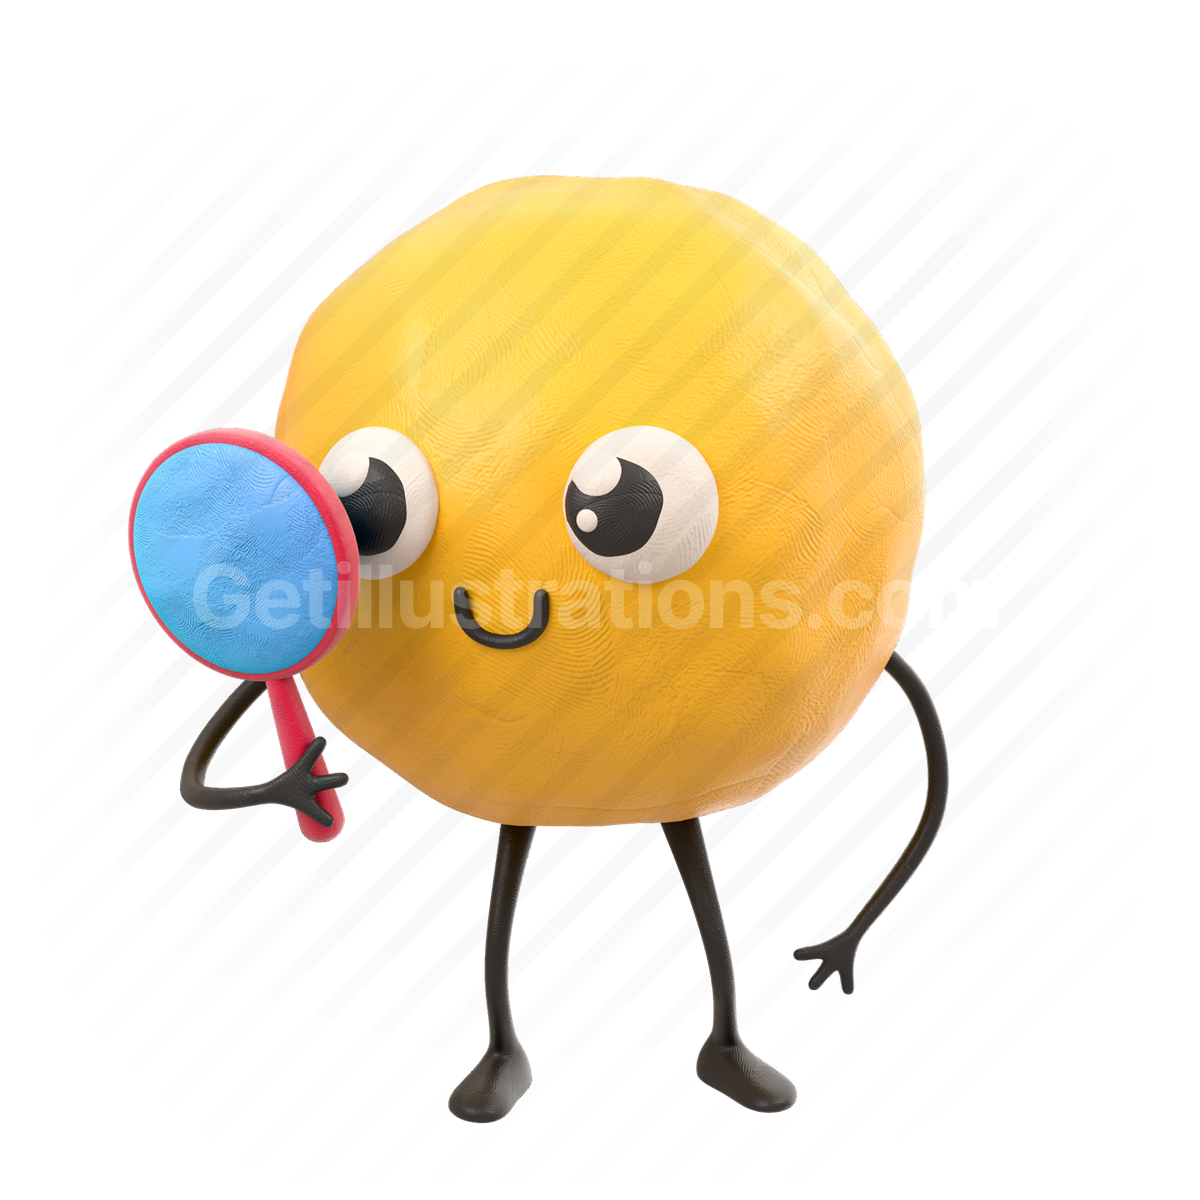 ball, character, emoticon, emoji, search, find, magnifier, research